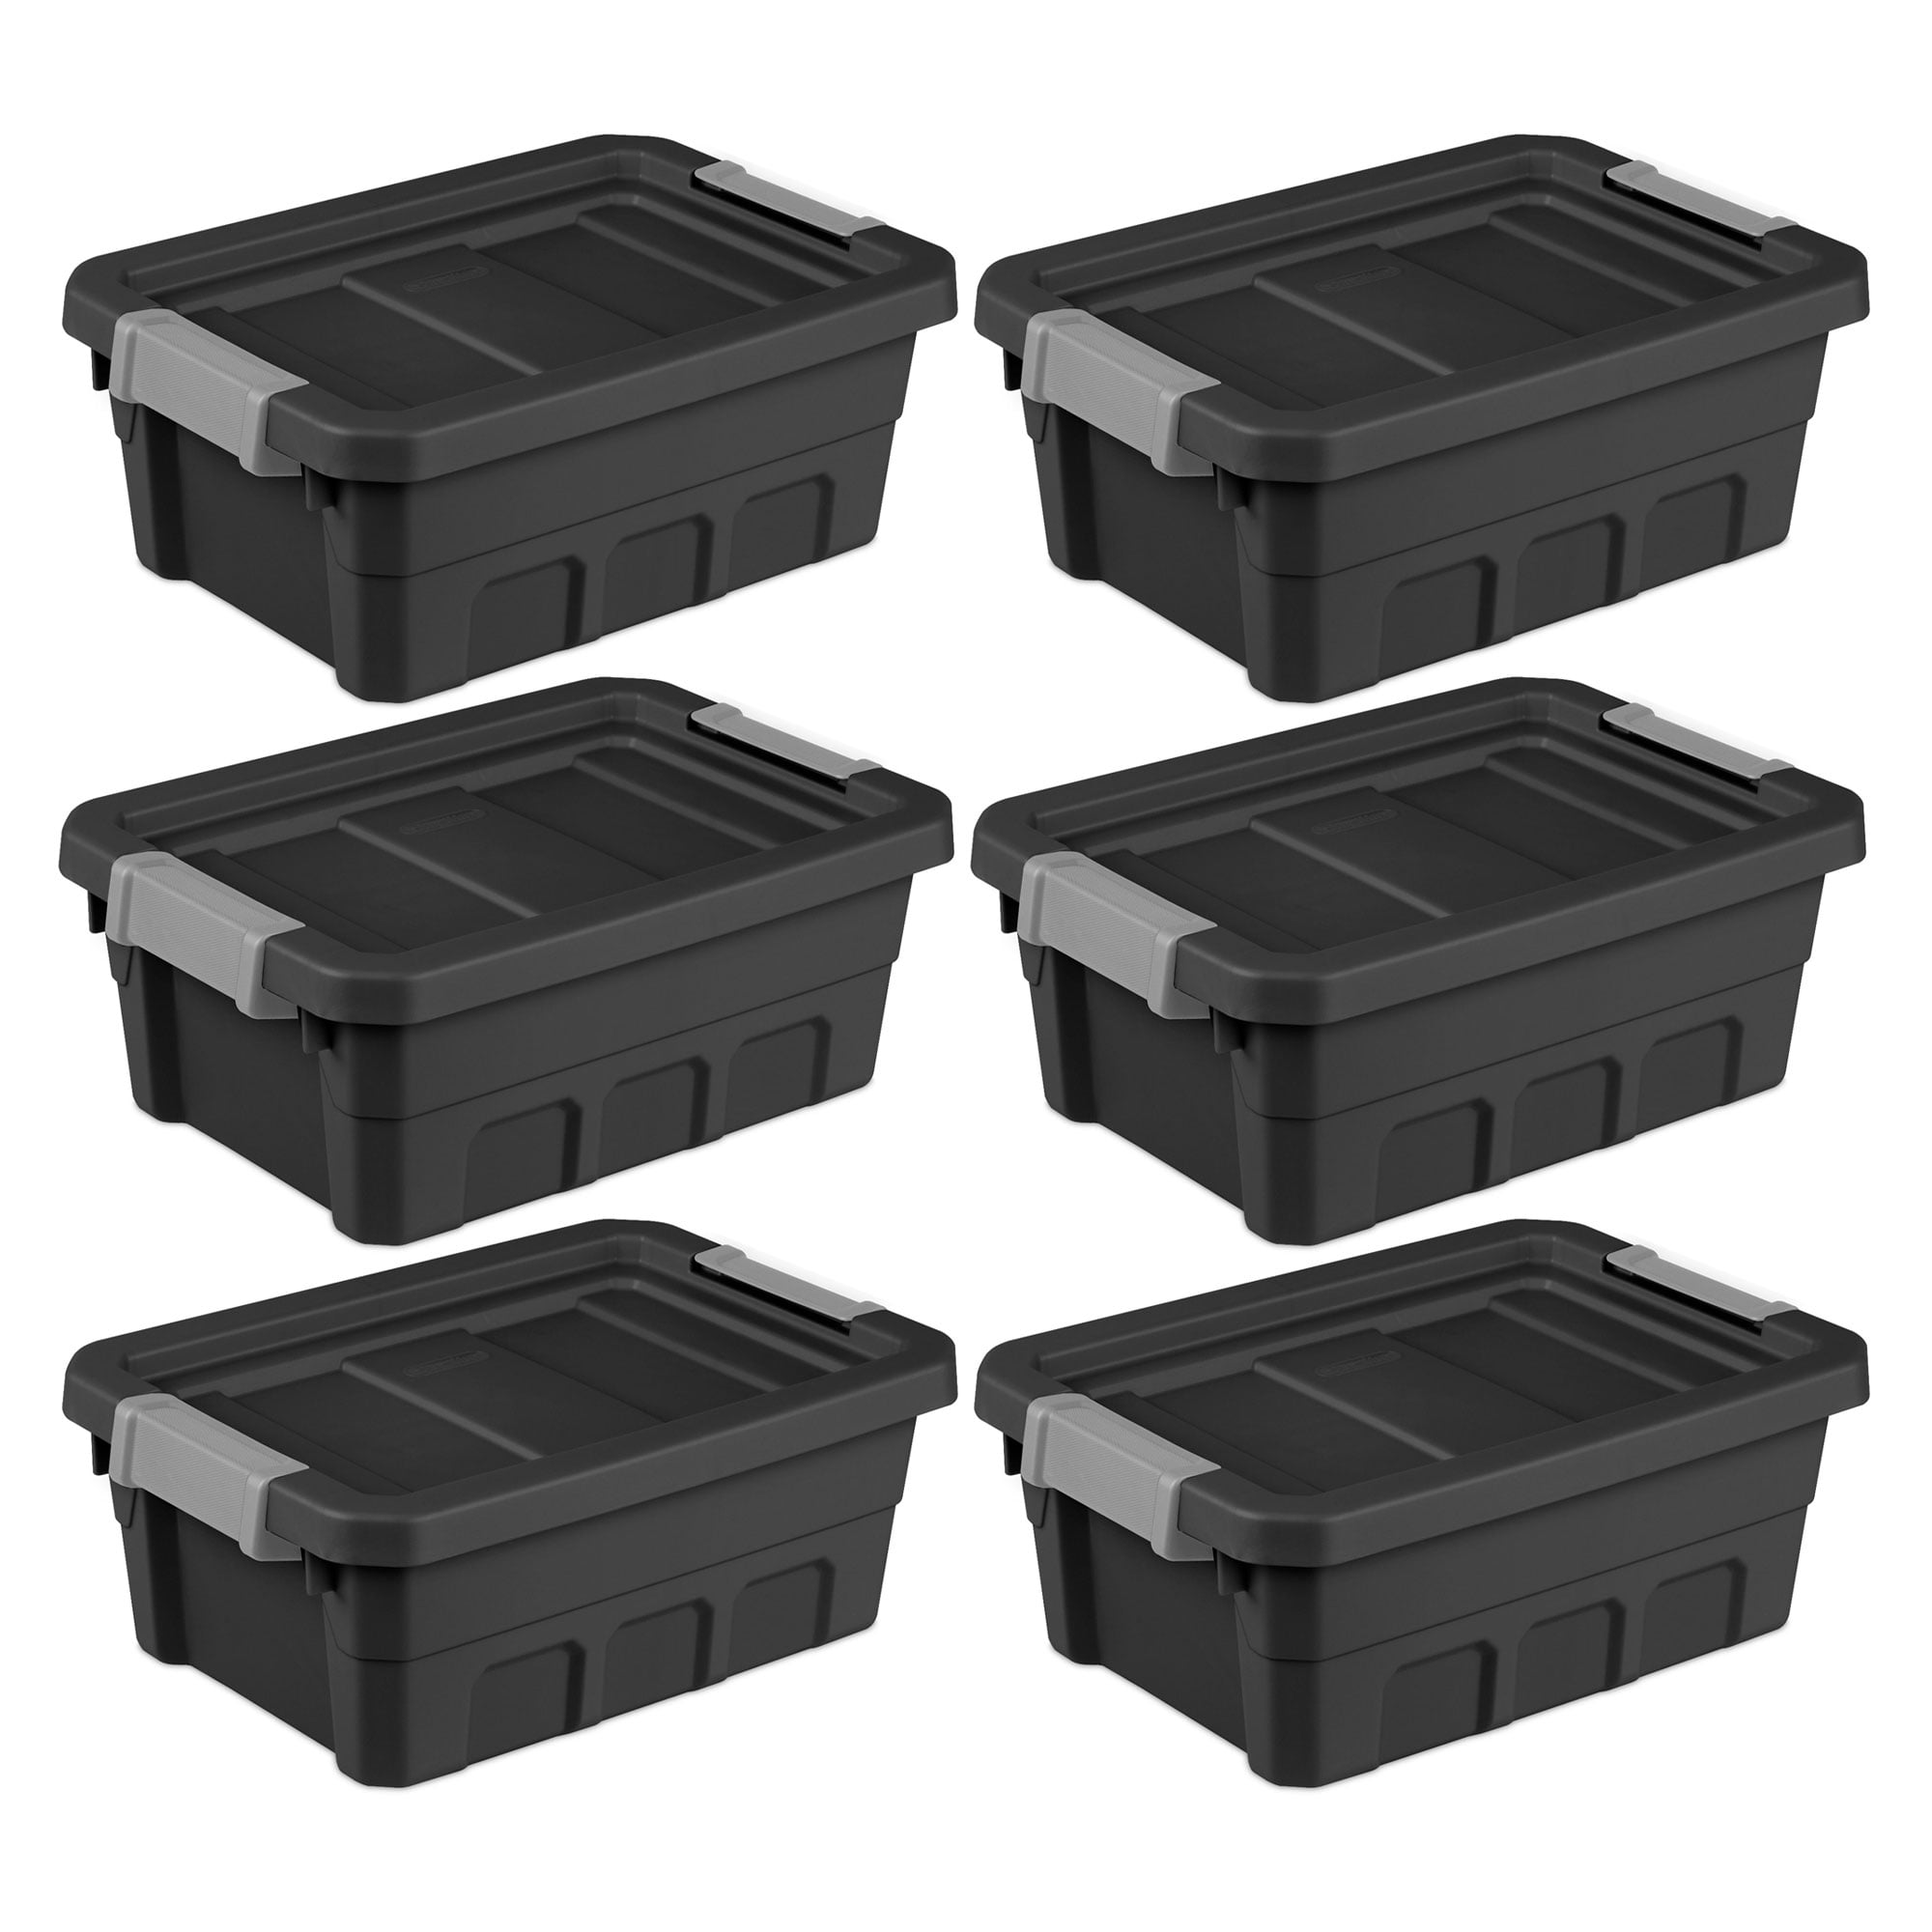 Ggbin 6 Quart Clear Latch Storage Box with Black Handle and Latches - 4 Pack